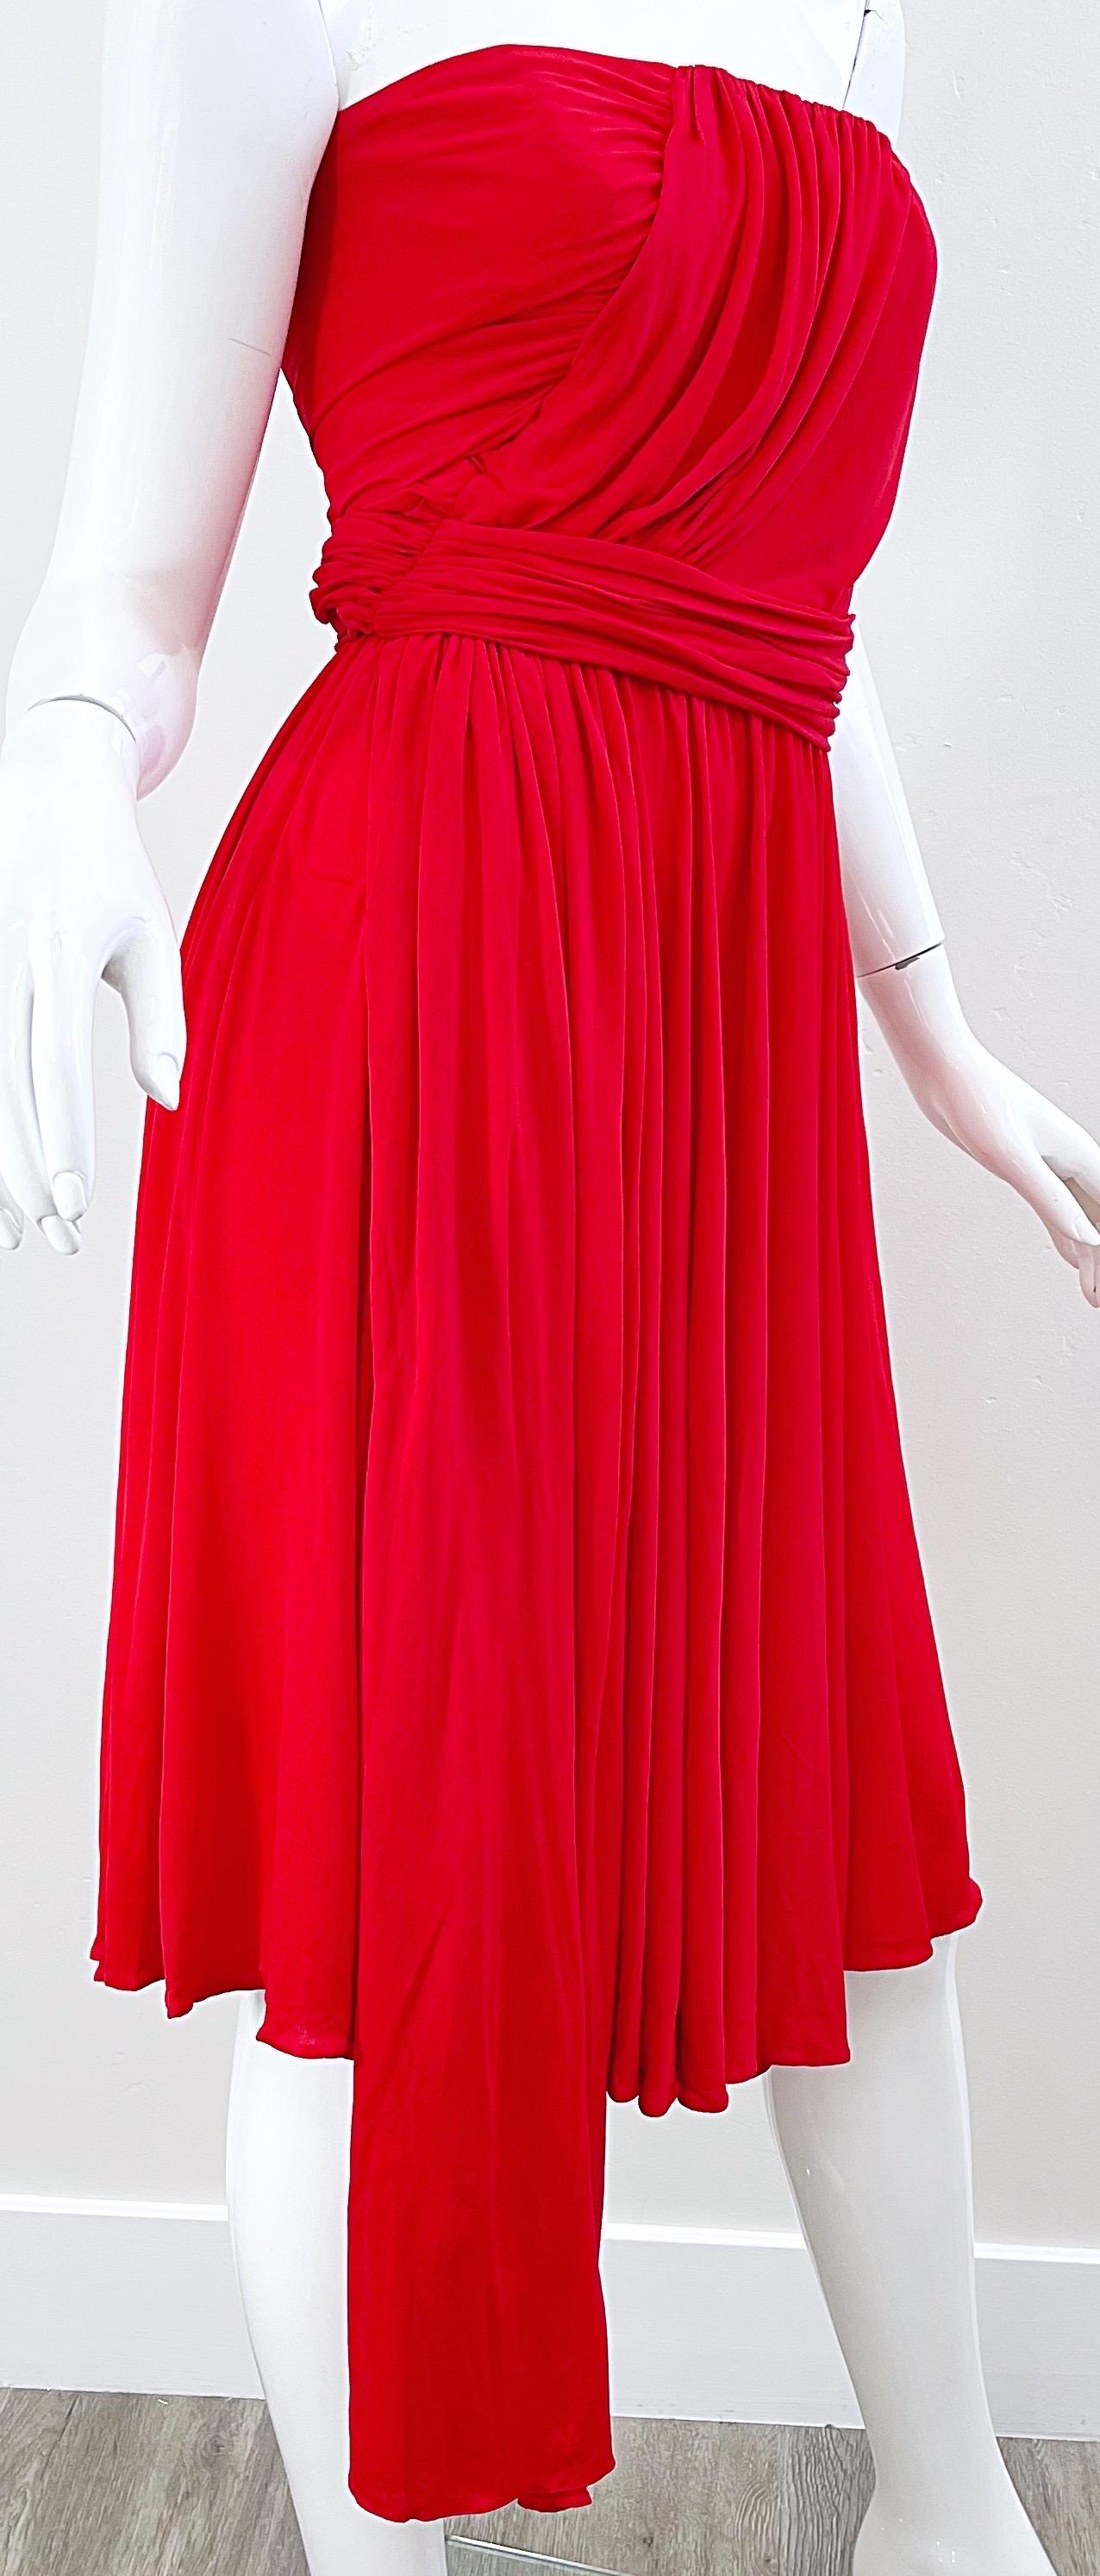 Runway Yves Saint Laurent S/S 1989 Lipstick Red Rayon Jersey Strapless 80s Dress For Sale 8